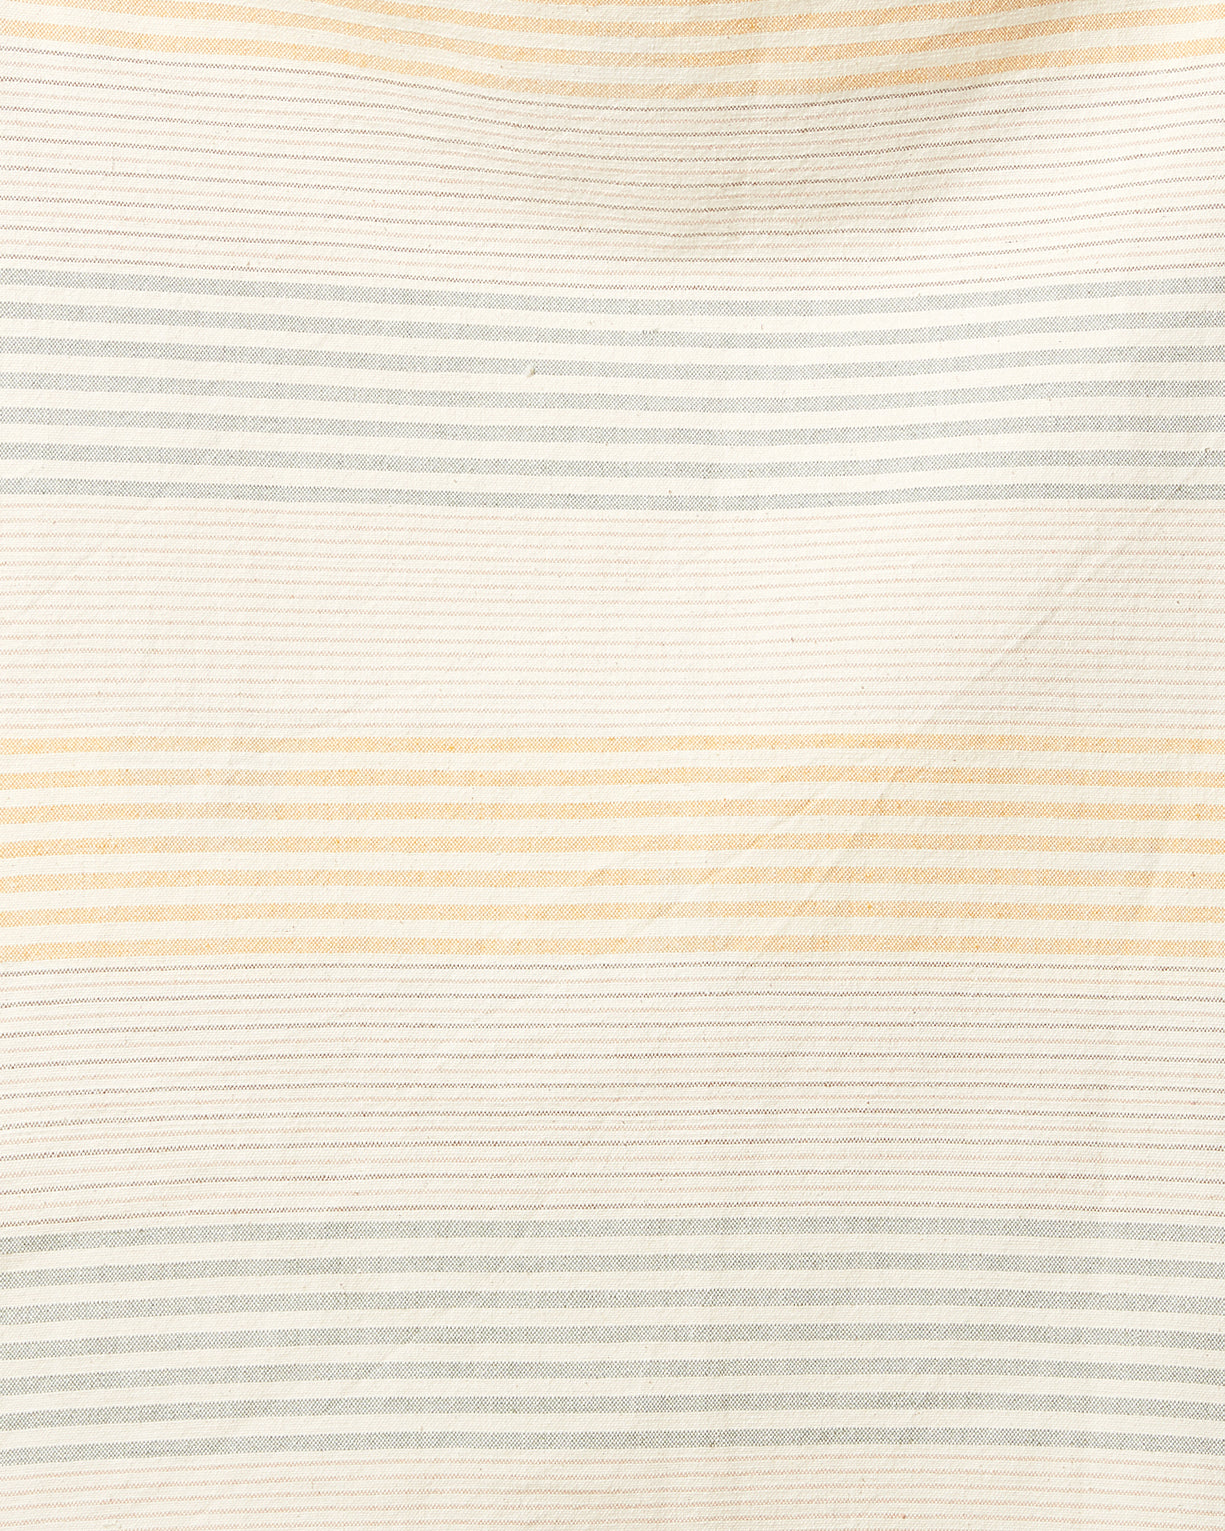 ethically handwoven oeko-tex certified cotton fabric yardage by MINNA, yellow and light green stripes